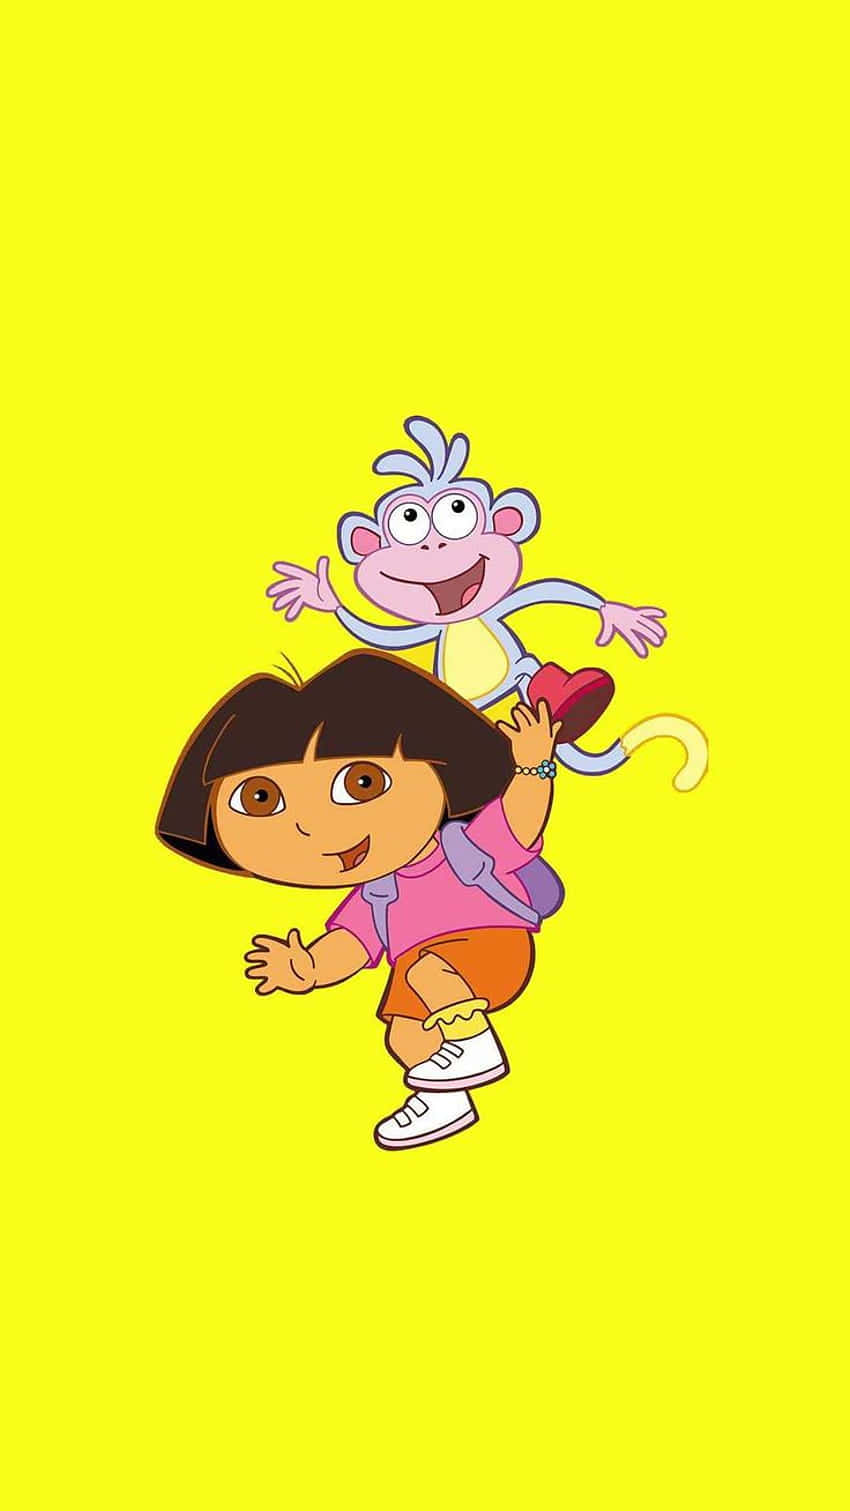 Laugh Out Loud with Funny Dora! Wallpaper